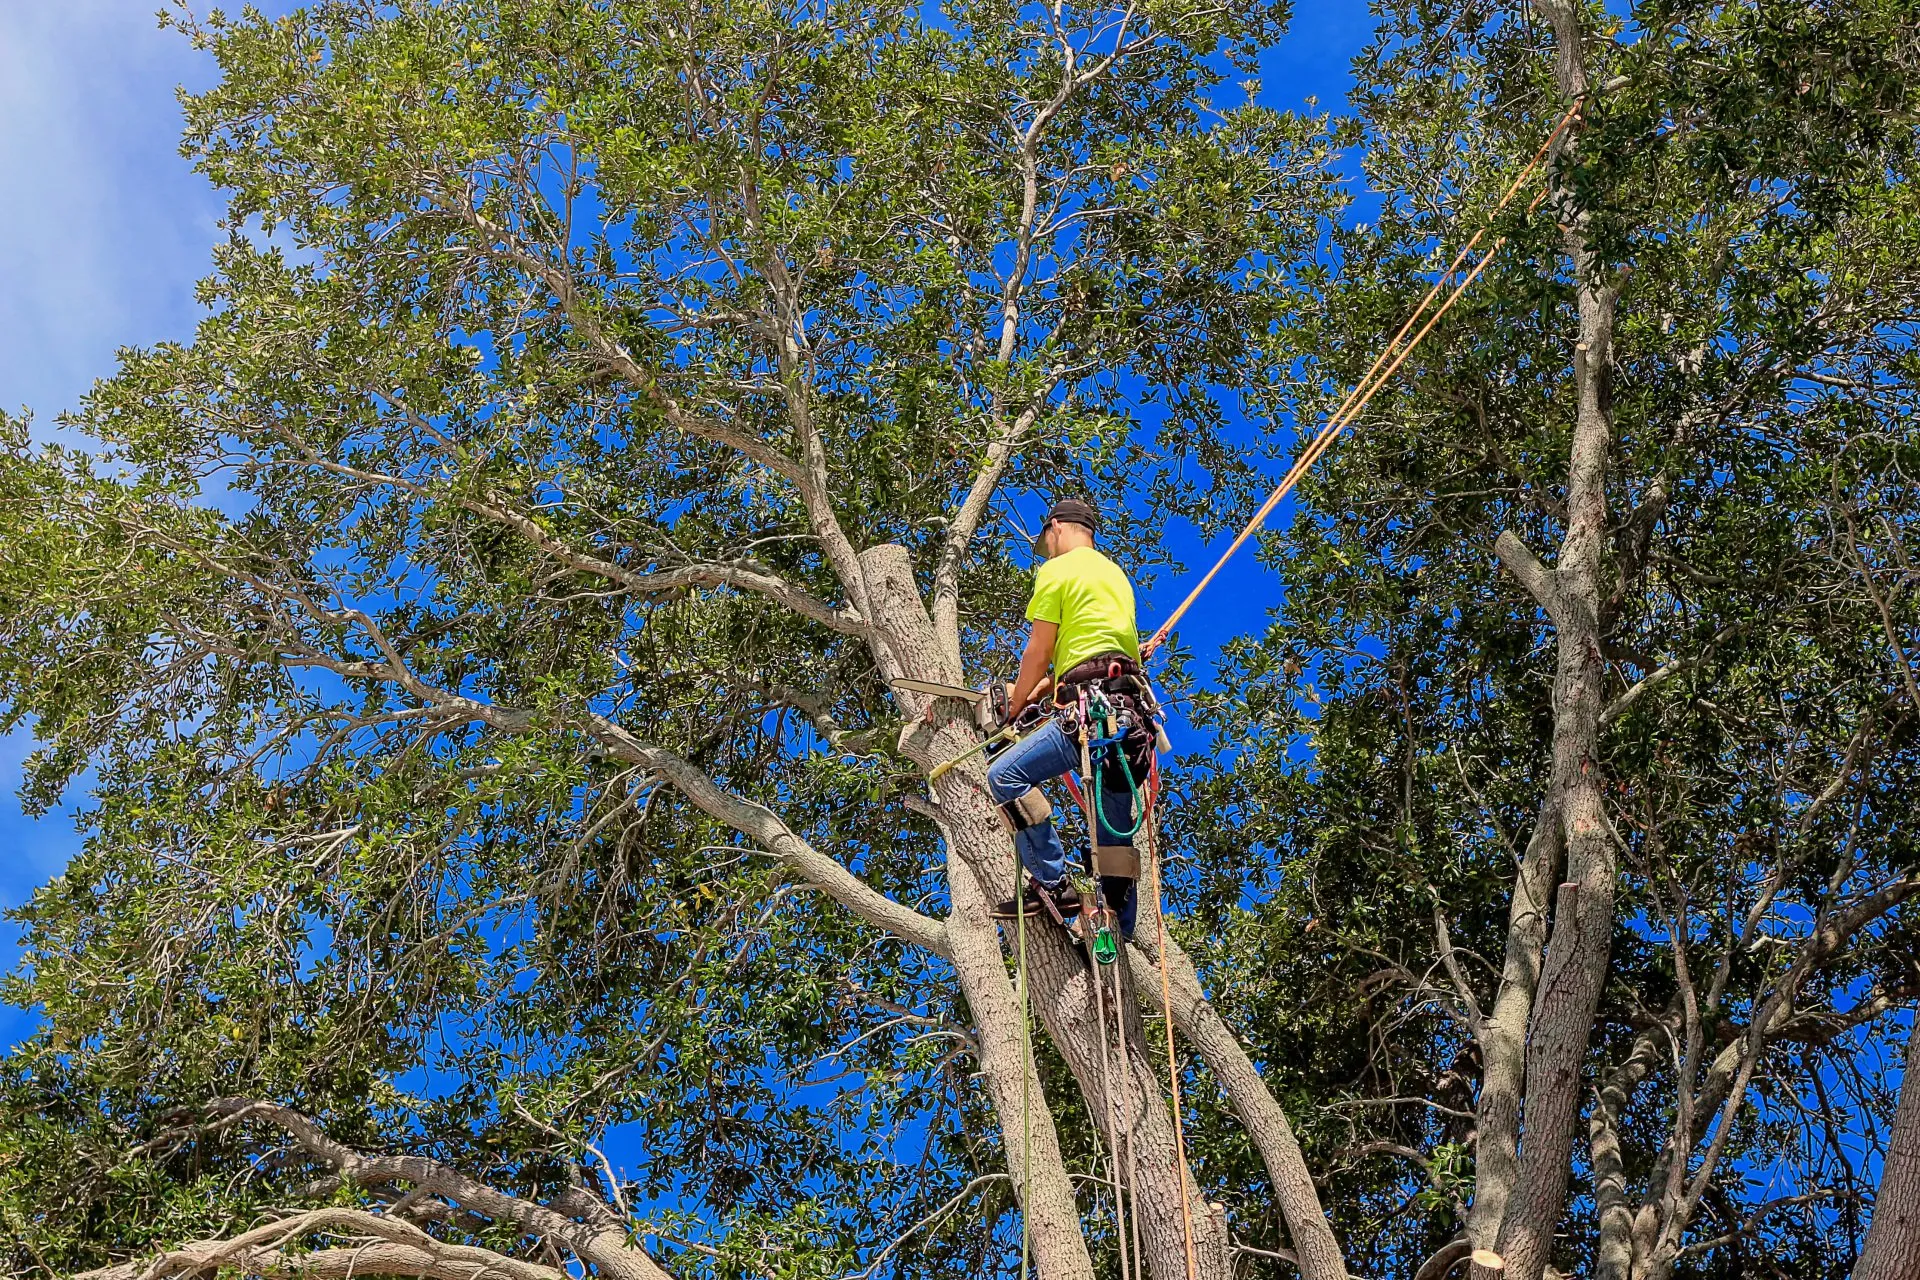 stock-photo-pruning-southern-live-oak-tree-quercus-virginiana-by-a-woodcutter-with-chainsaw-and-equipped-646538812-1920w.jpg